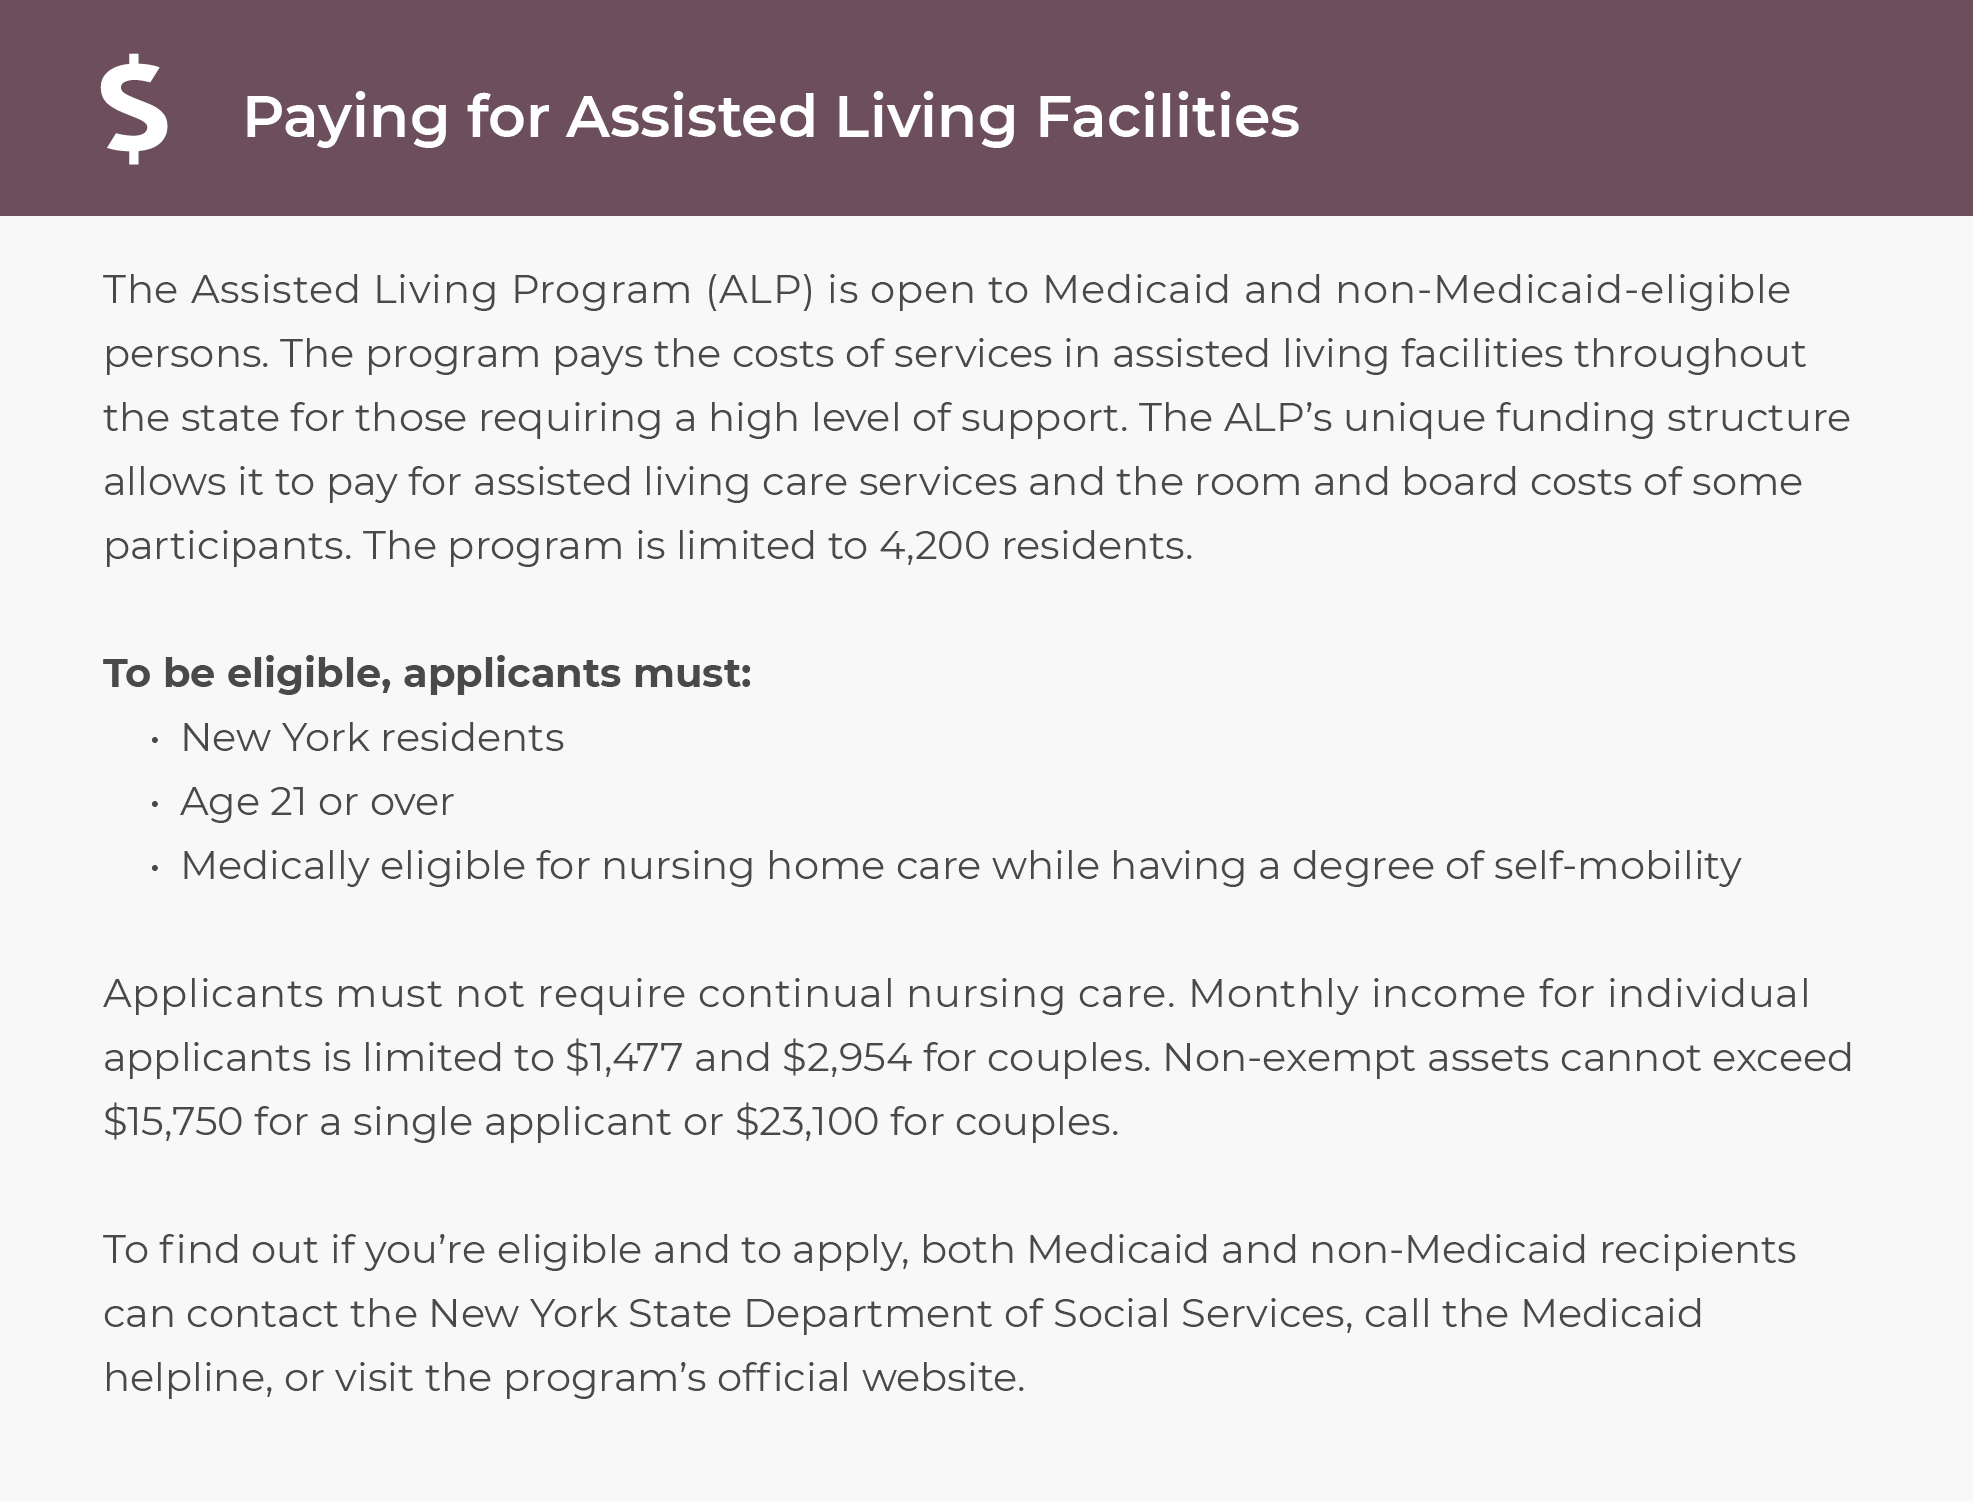 Paying for assisted living in New York